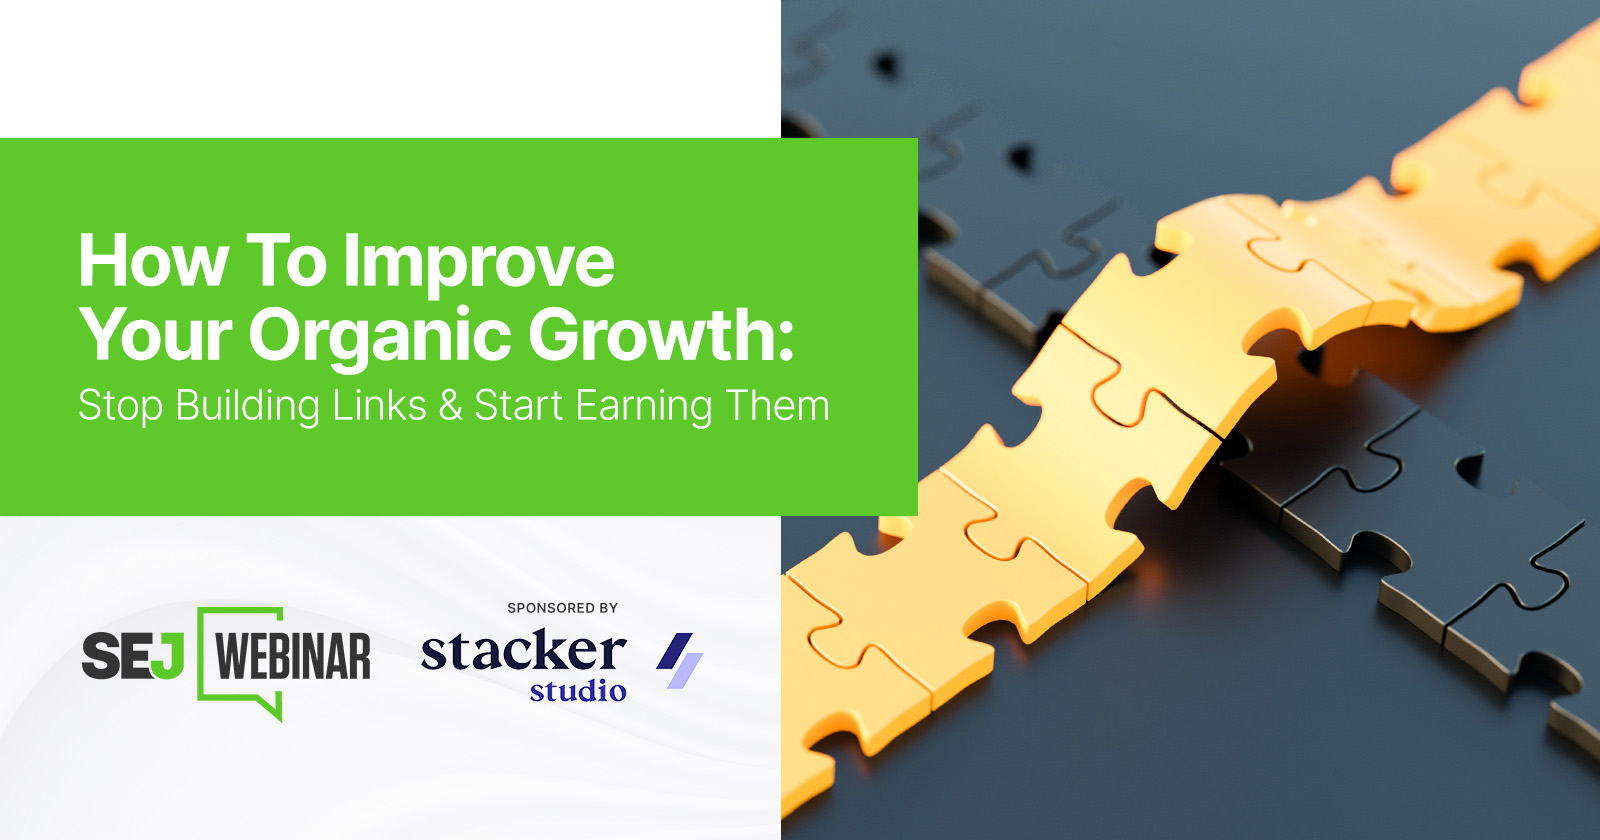 How To Improve Your Organic Growth: Stop Building Links & Start Earning Them [Webinar] via @sejournal, @hethr_campbell